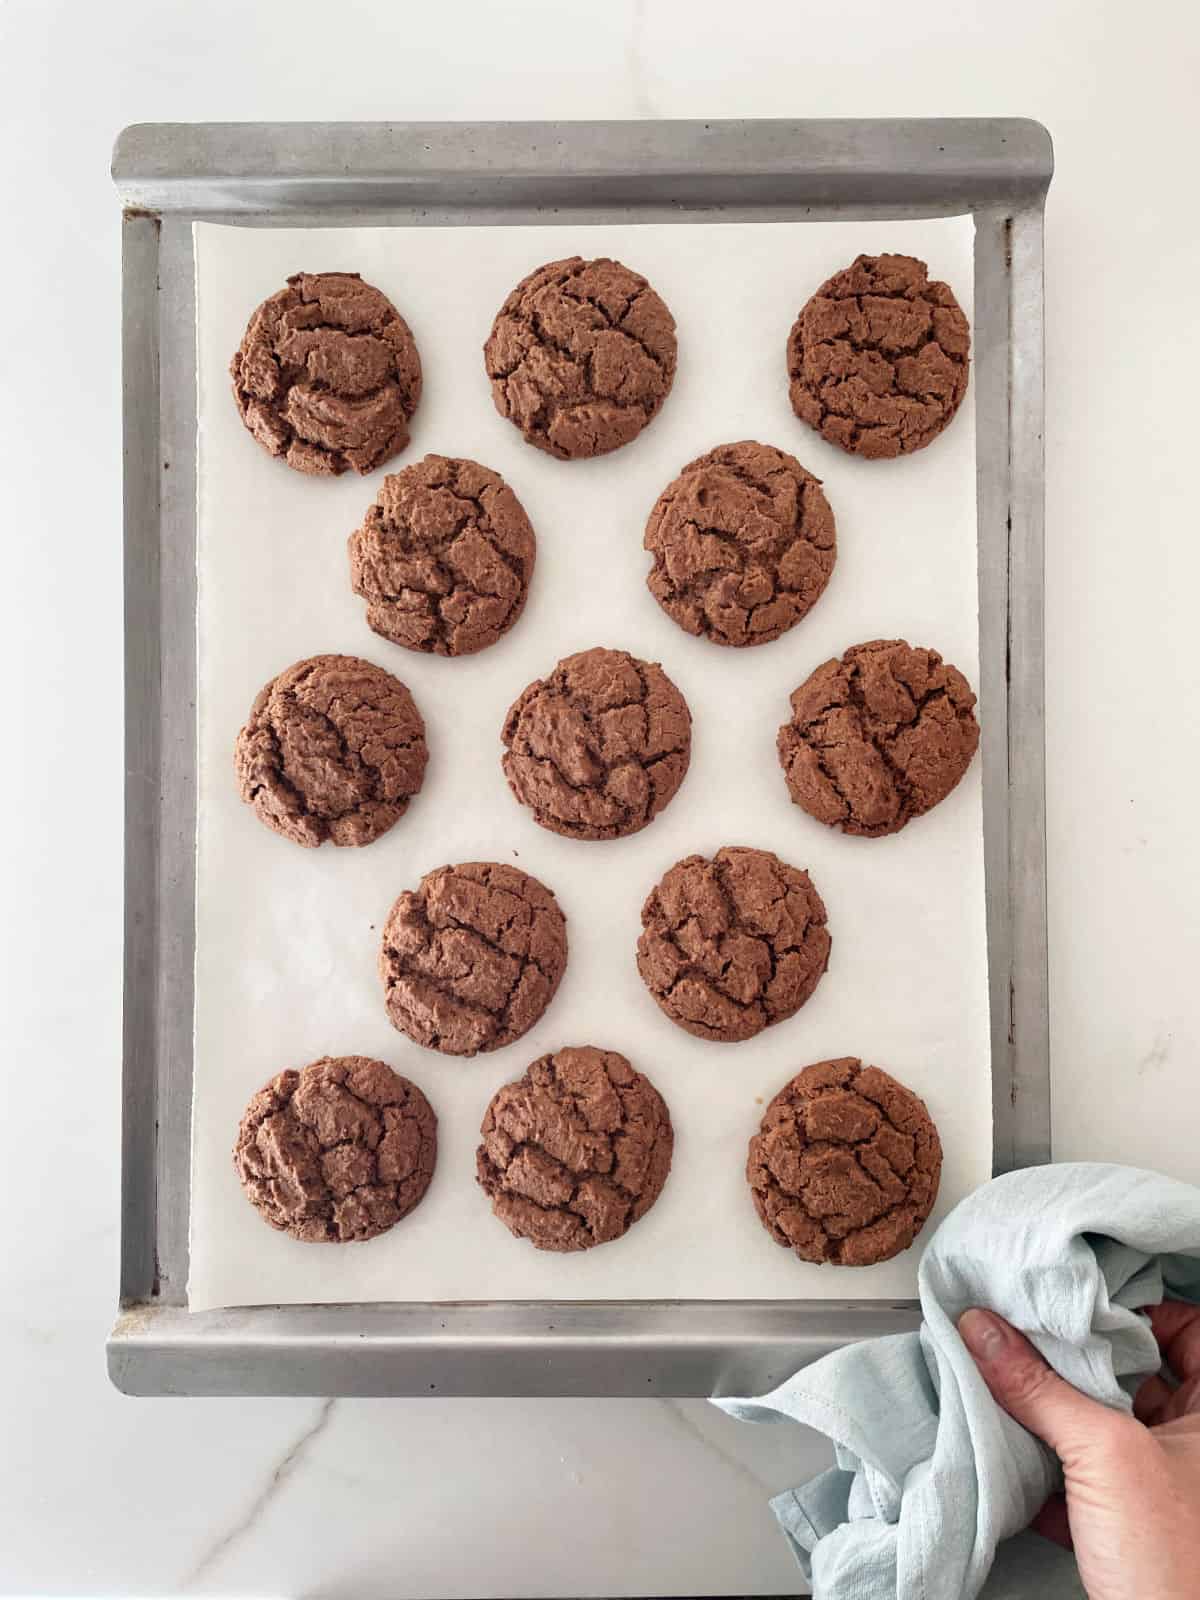 Baked chocolate cookies on a metal pan with parchment paper on a white marble surface. Hand holding it with a towel.